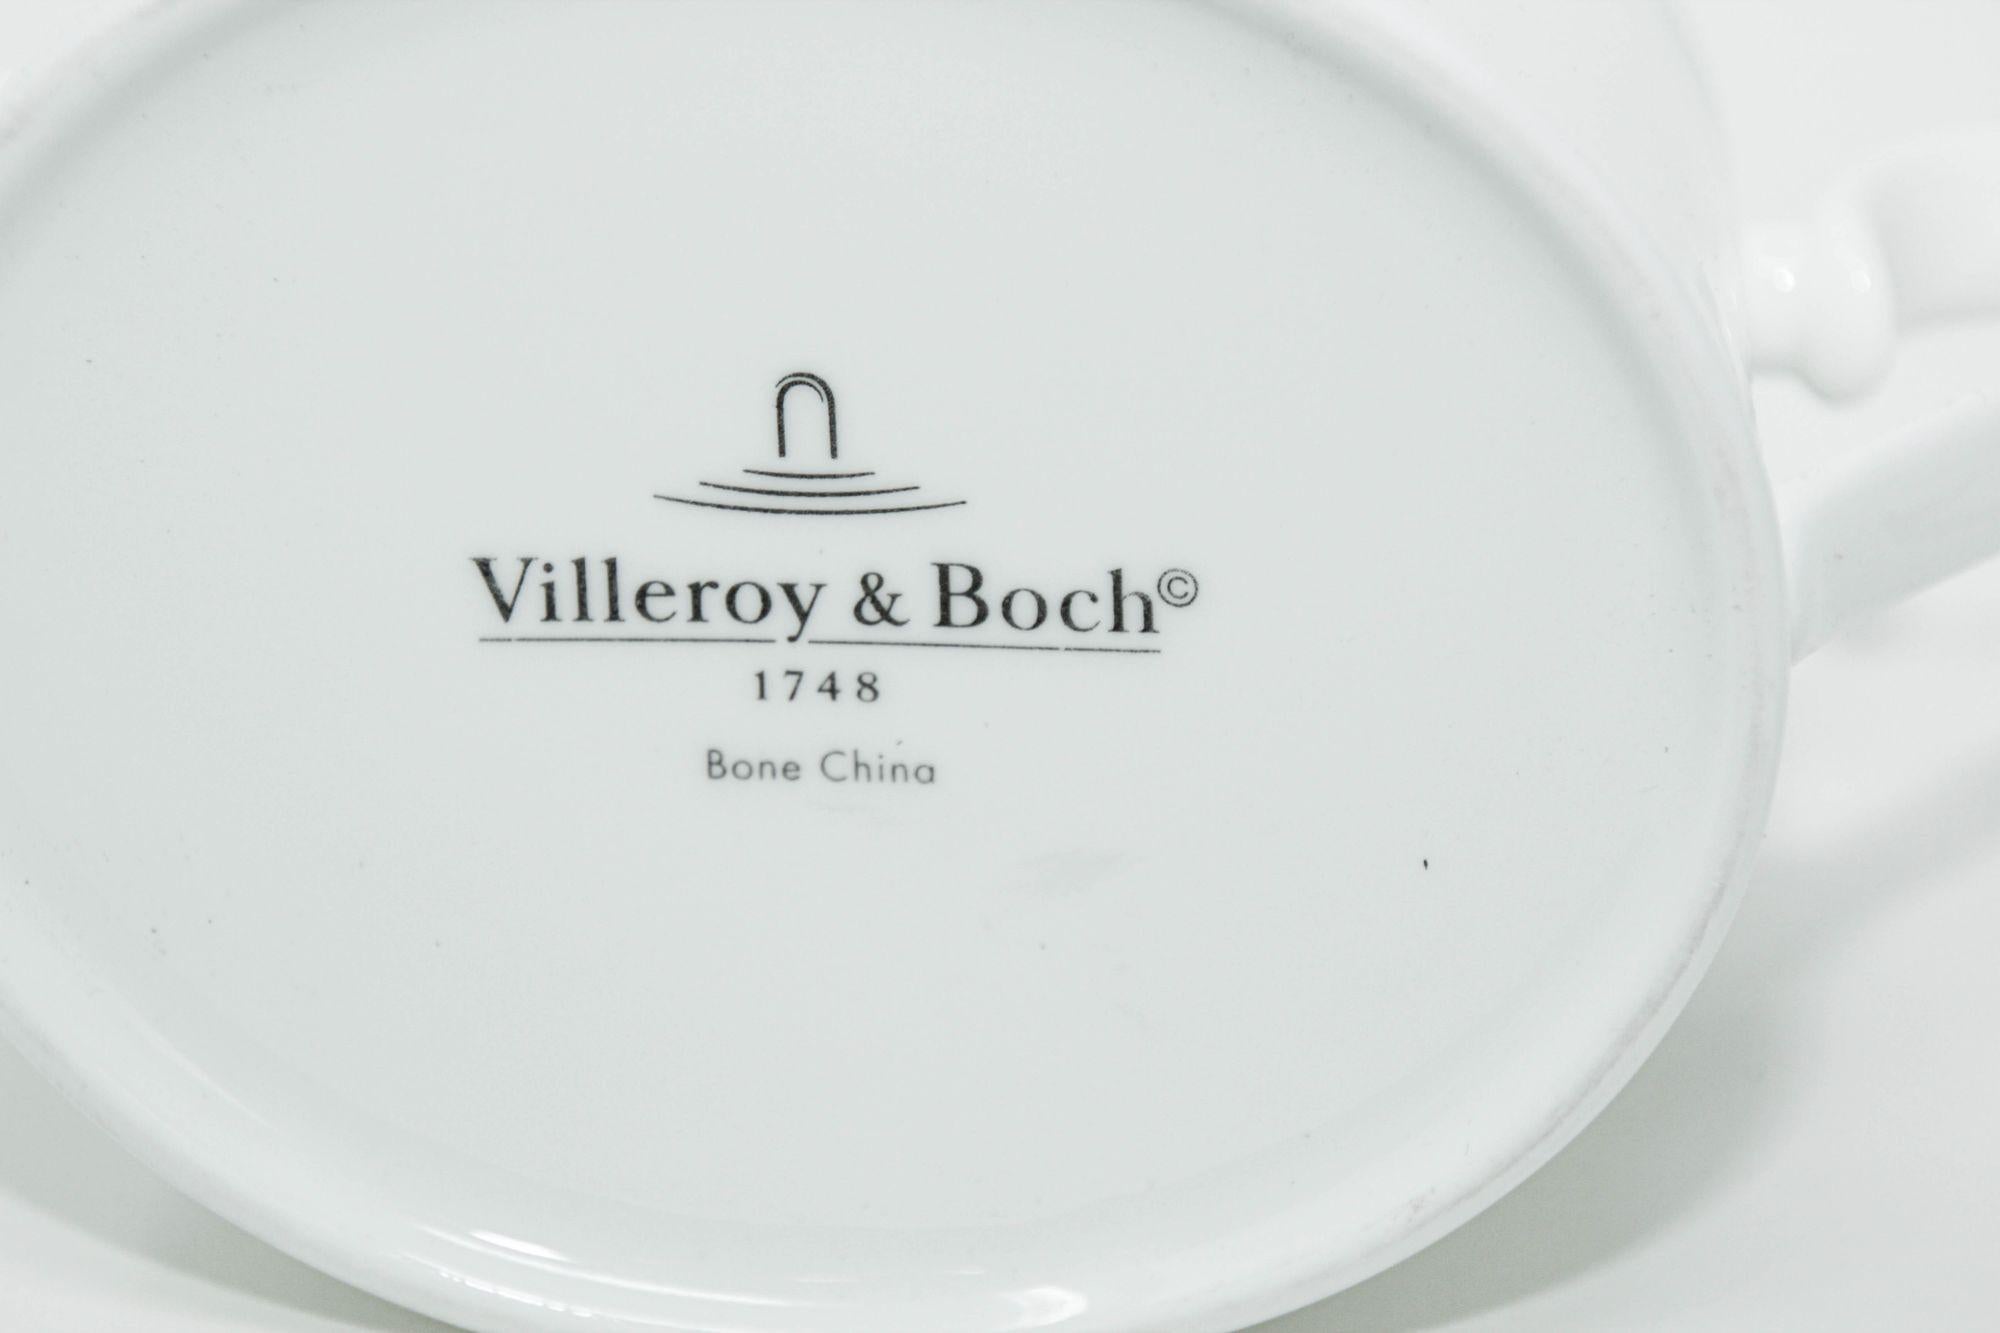 Porcelain Villeroy & Boch Stella Hotel white Bone China Sugar Bowl with Cover For Sale